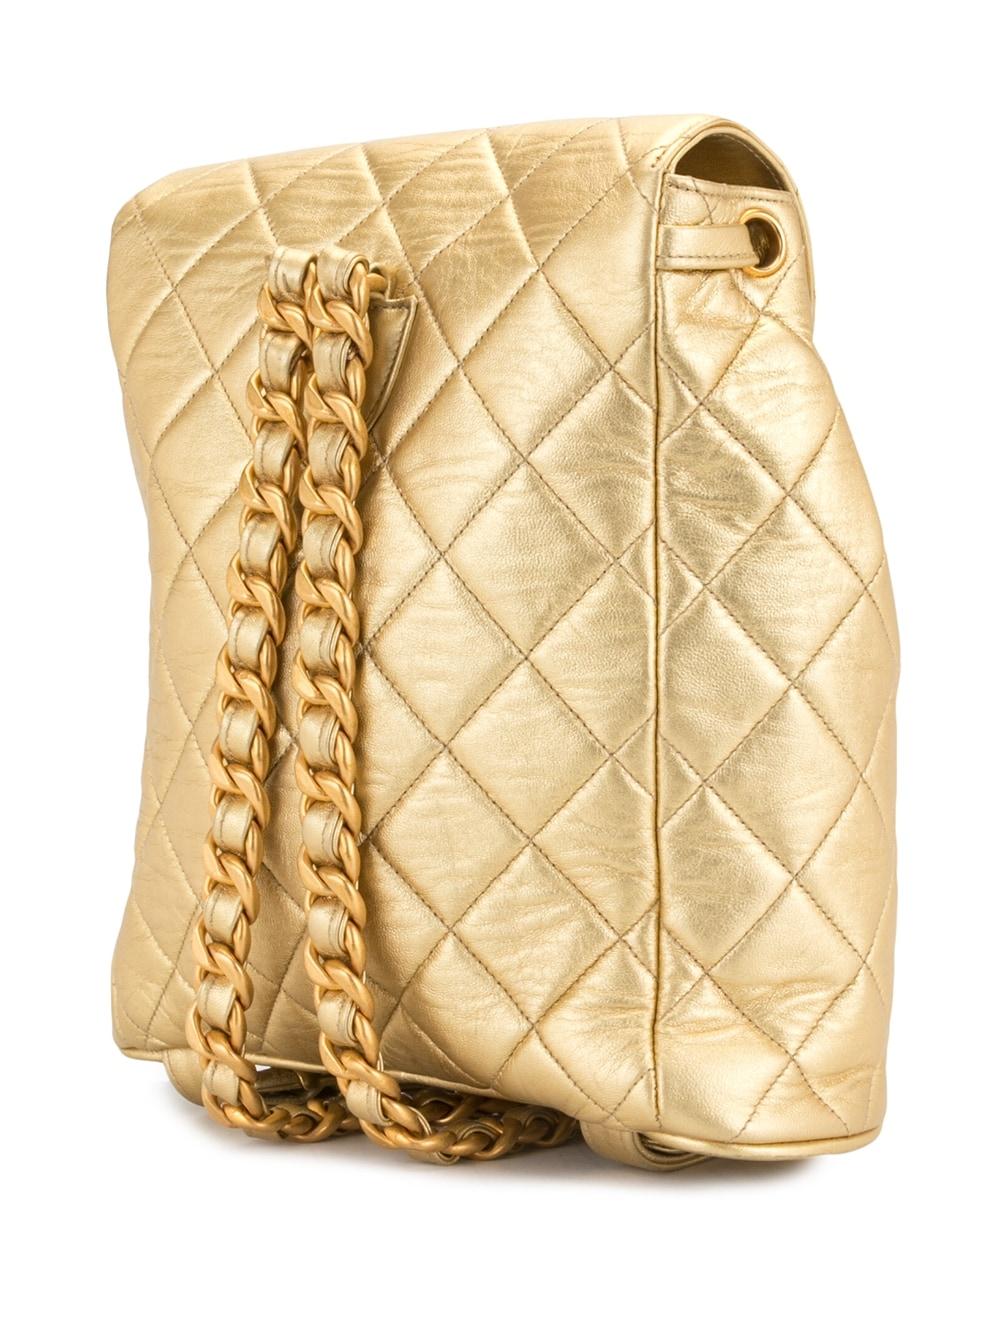 Chanel 1994 Vintage Rare Metallic Gold Quilted Lambskin Duma CC Logo Backpack For Sale 2